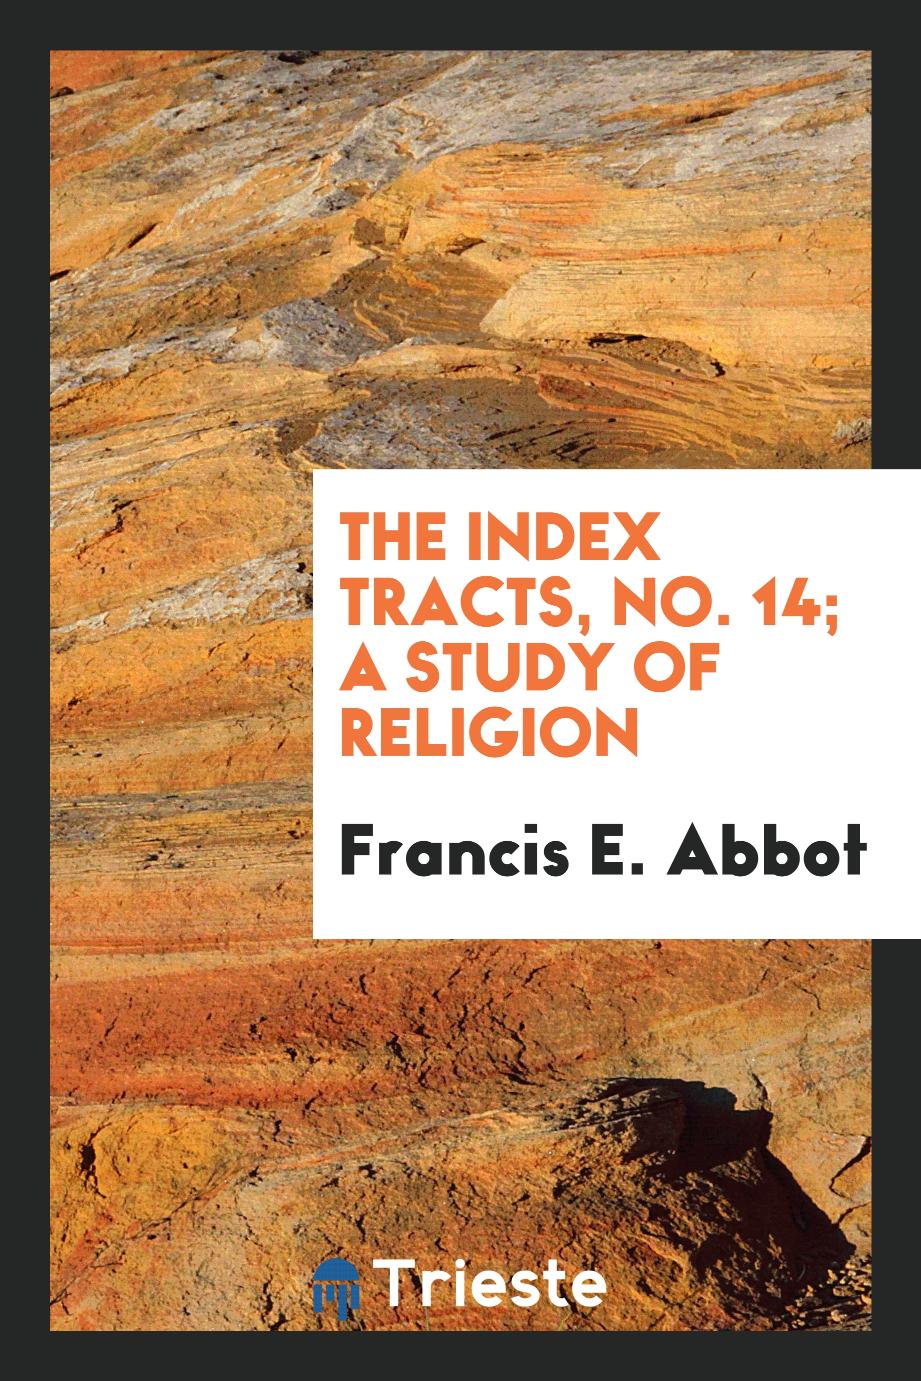 The index tracts, No. 14; A Study of Religion